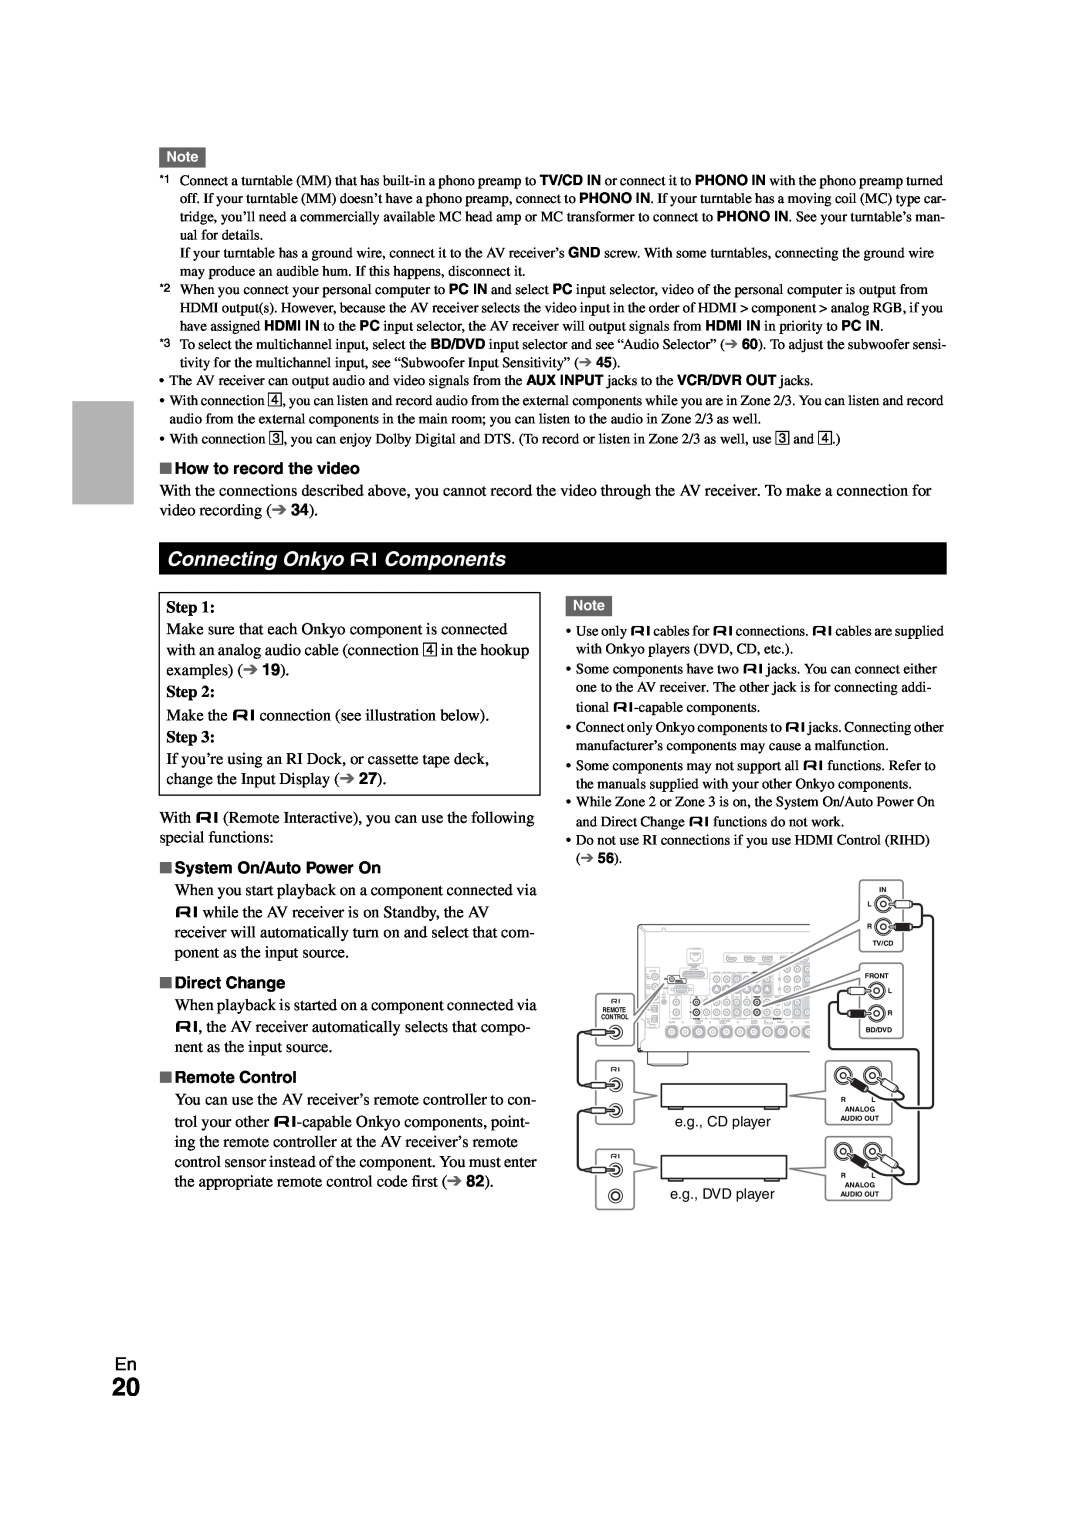 Onkyo TX-NR808 instruction manual Connecting Onkyo uComponents, How to record the video, Direct Change, Remote Control 